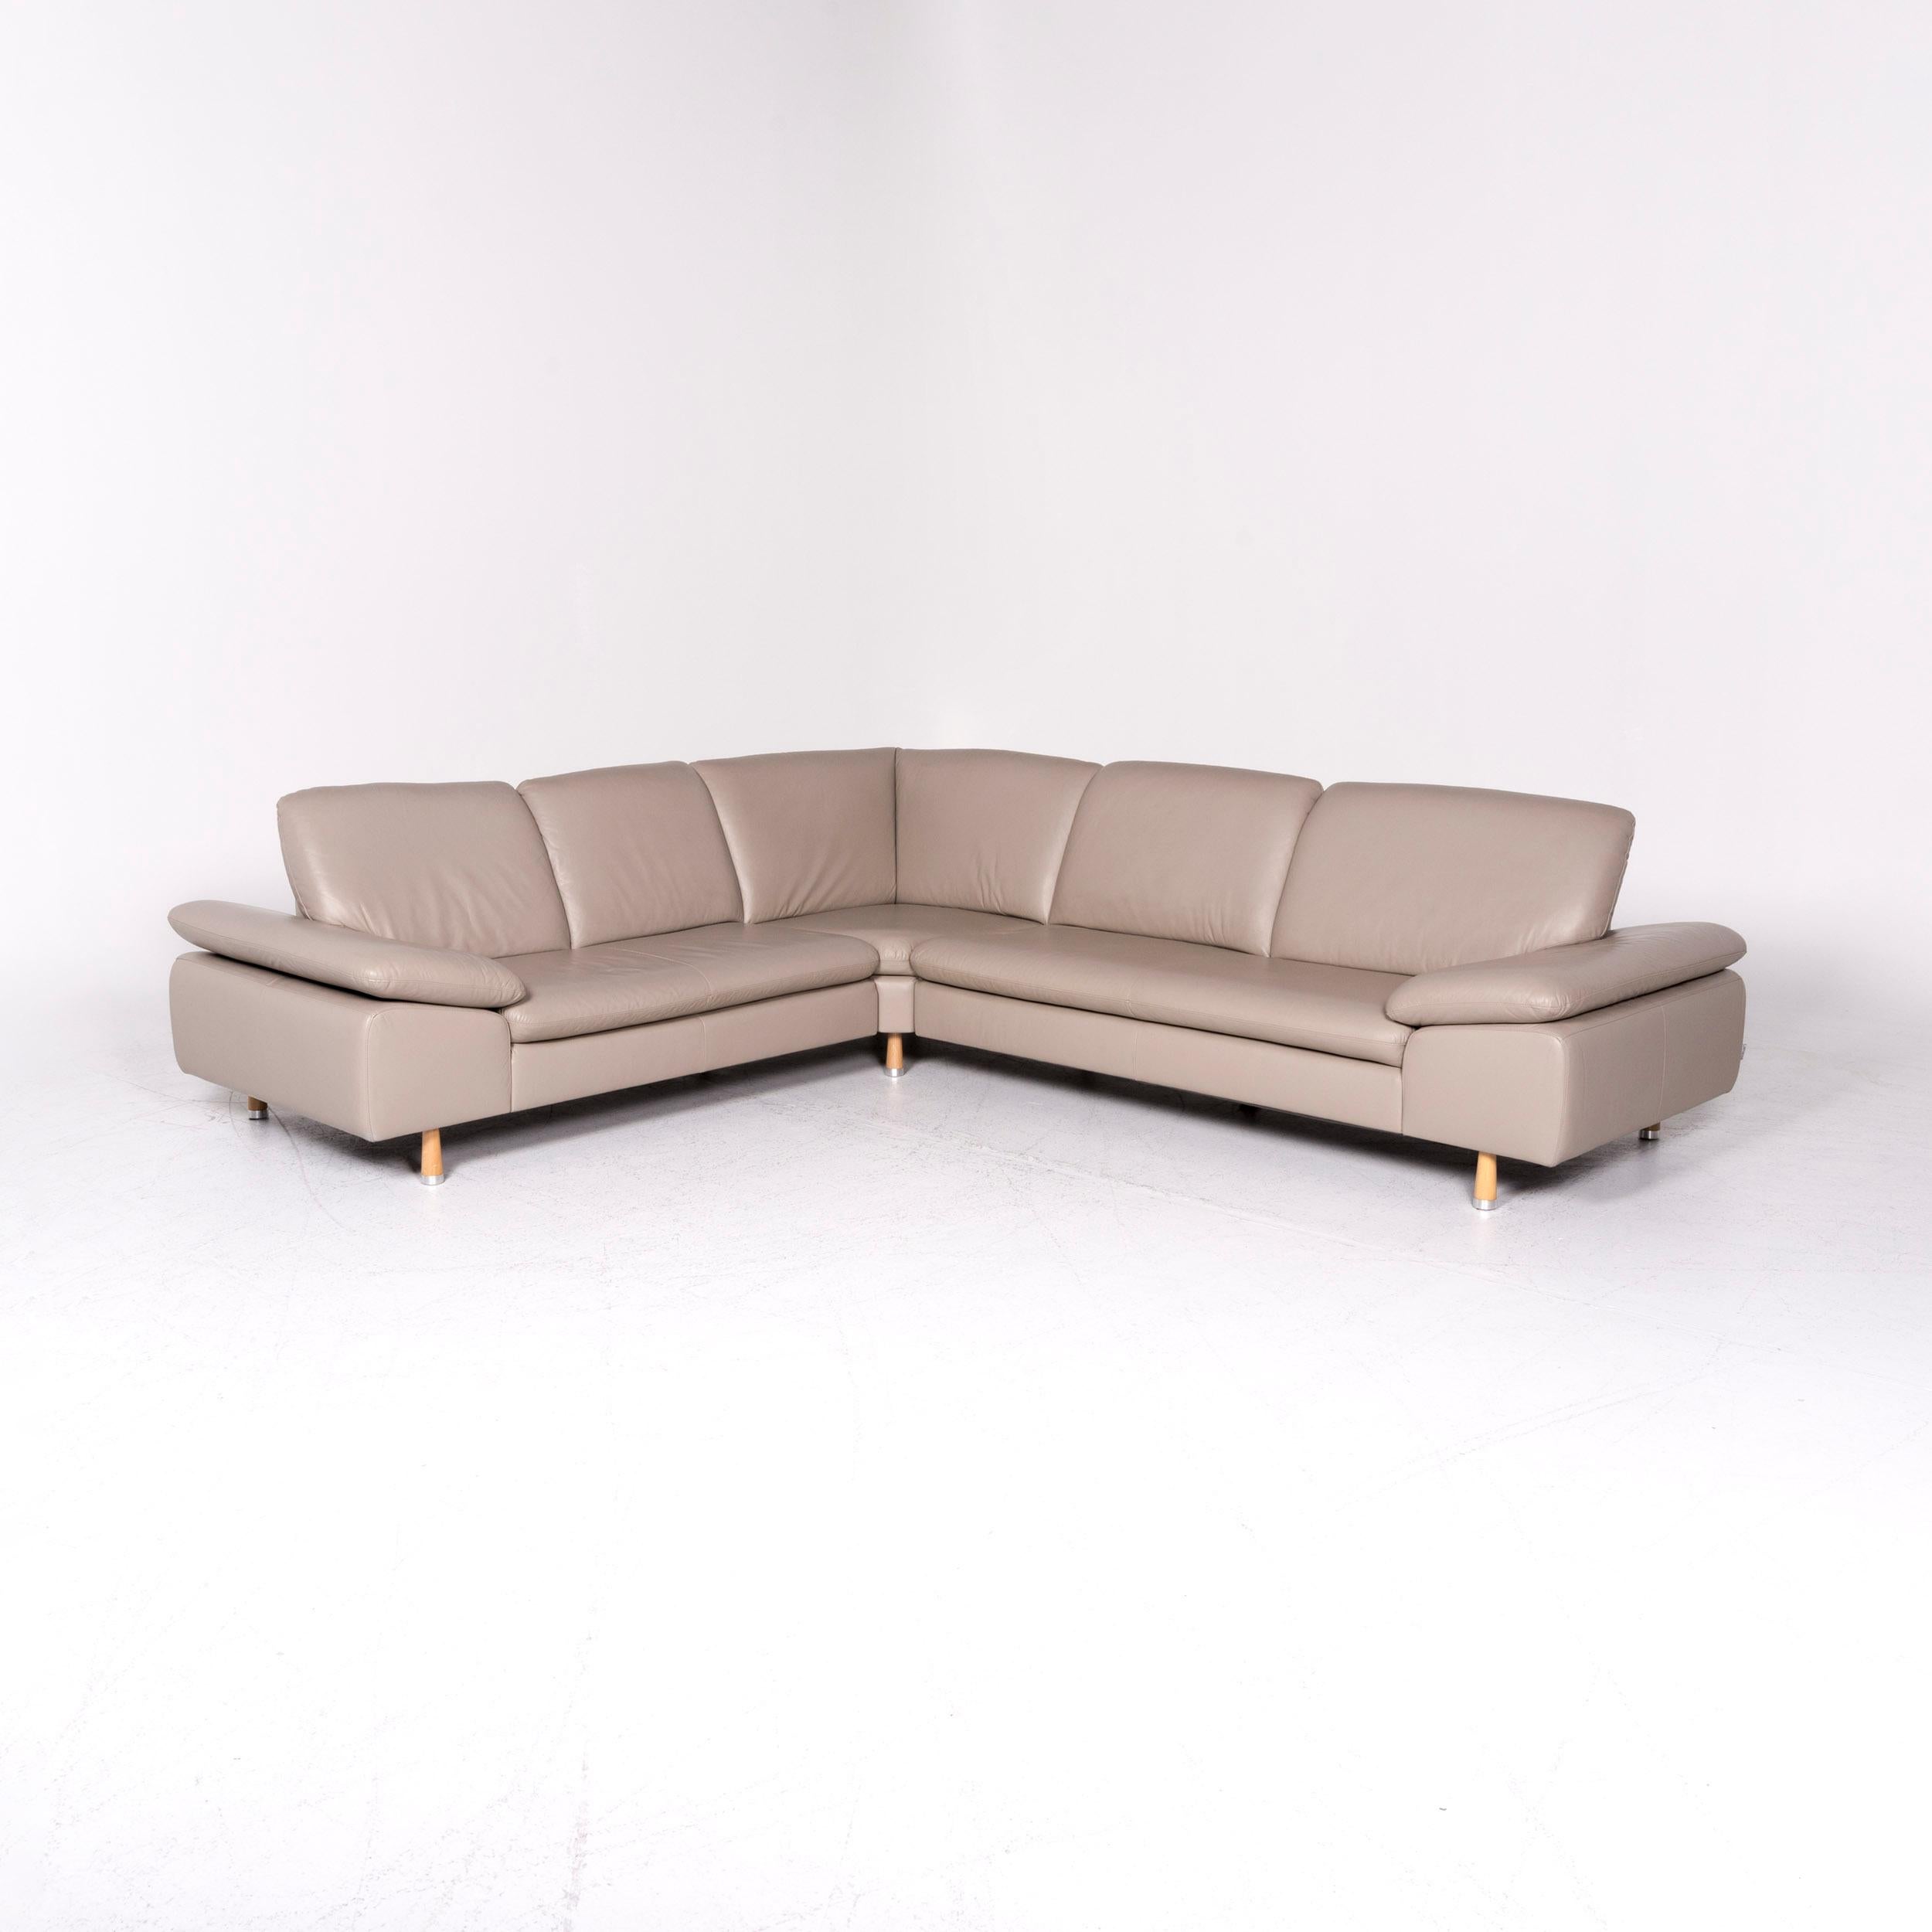 We bring to you a Willi Schillig designer leather sofa Beige corner sofa couch.
SKU: #8850

Product Measurements in centimeters:

depth: 276
width: 245
height: 81
seat-height: 42
rest-height: 53
seat-depth: 53
seat-width: 167
back-height: 42